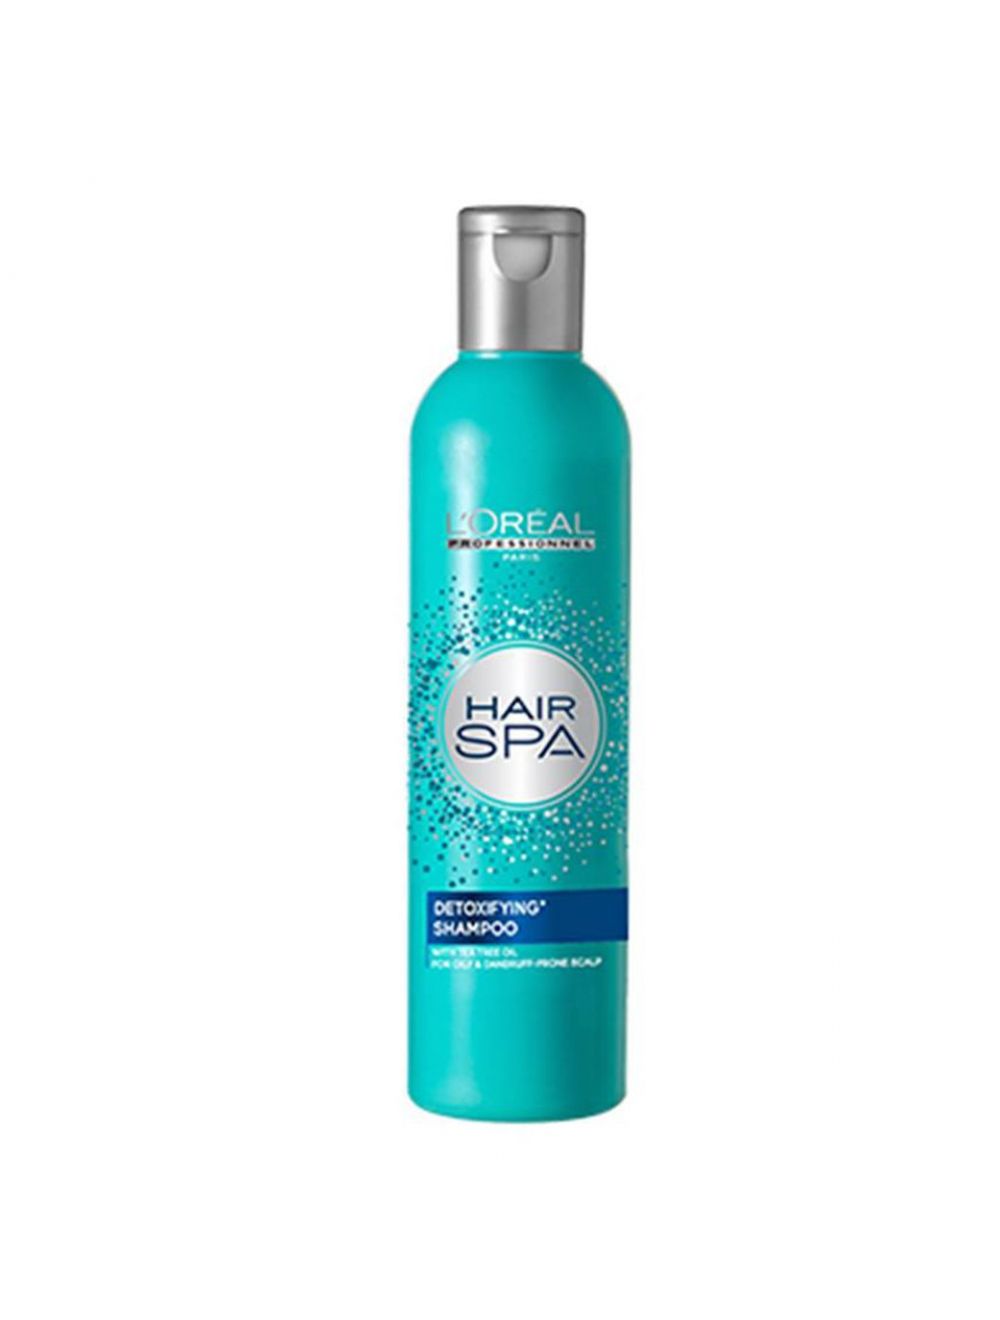 Buy L'Oreal Professionnel Detoxifying Shampoo Online in India